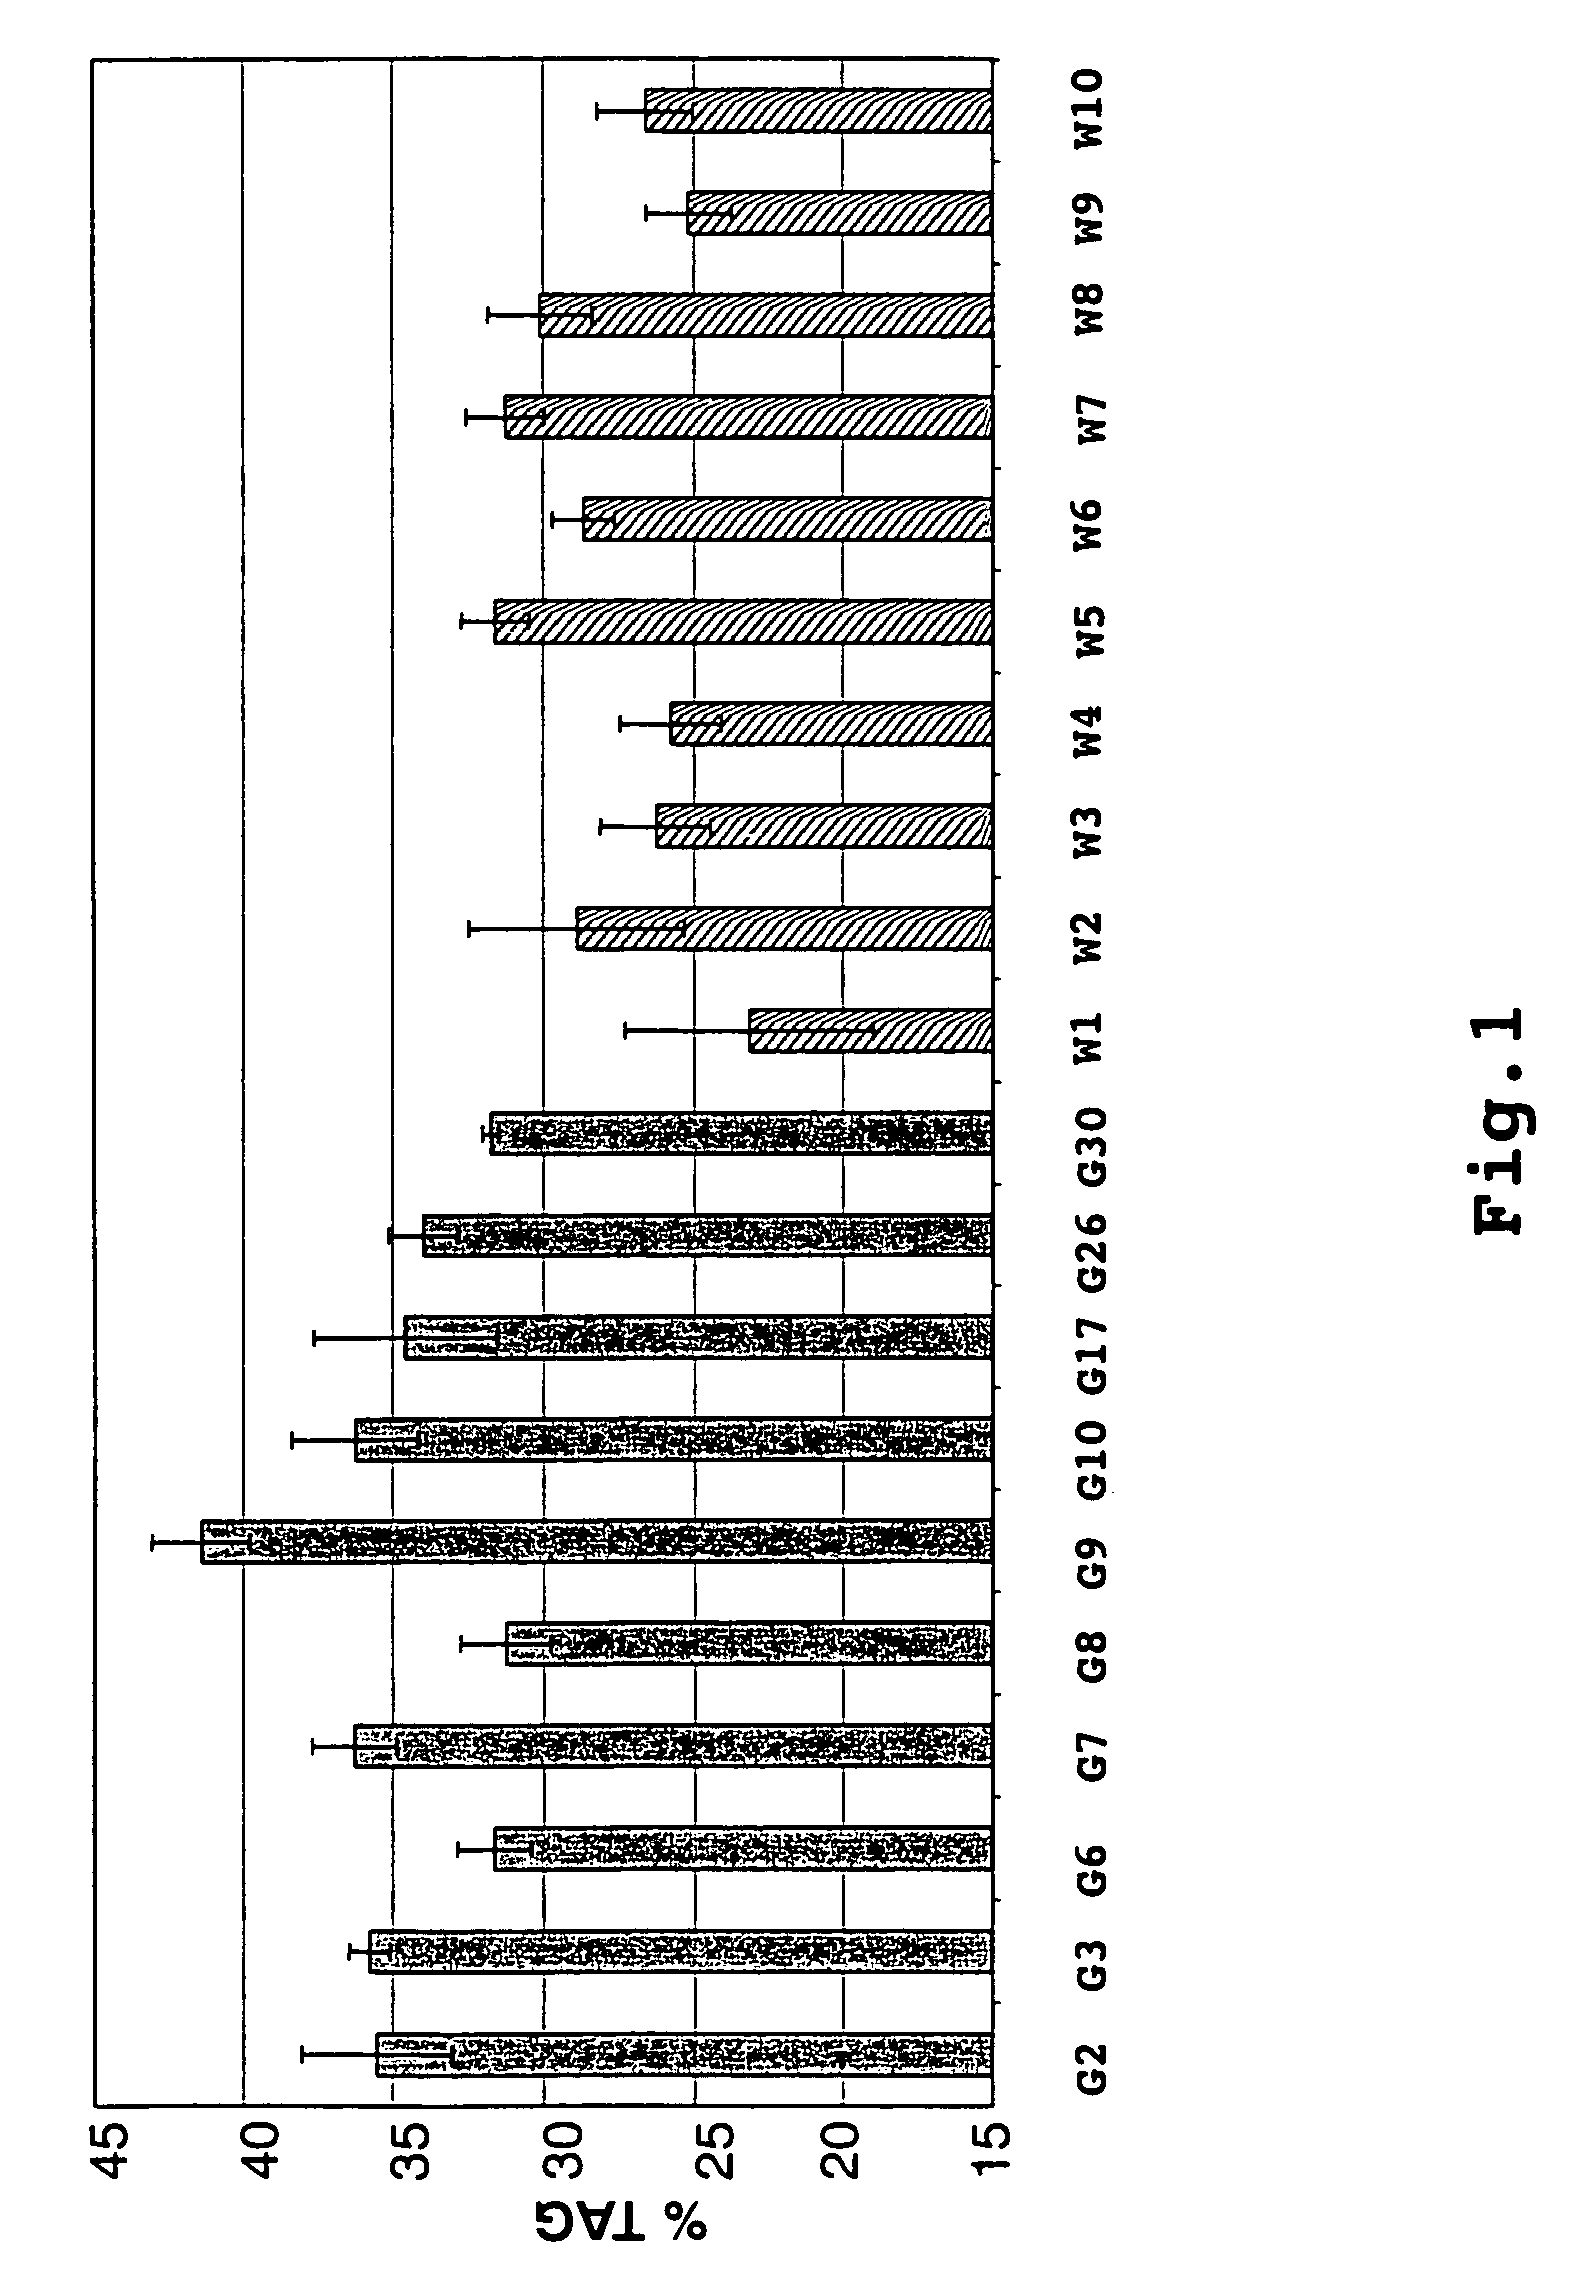 Methods for increasing oil content in plants